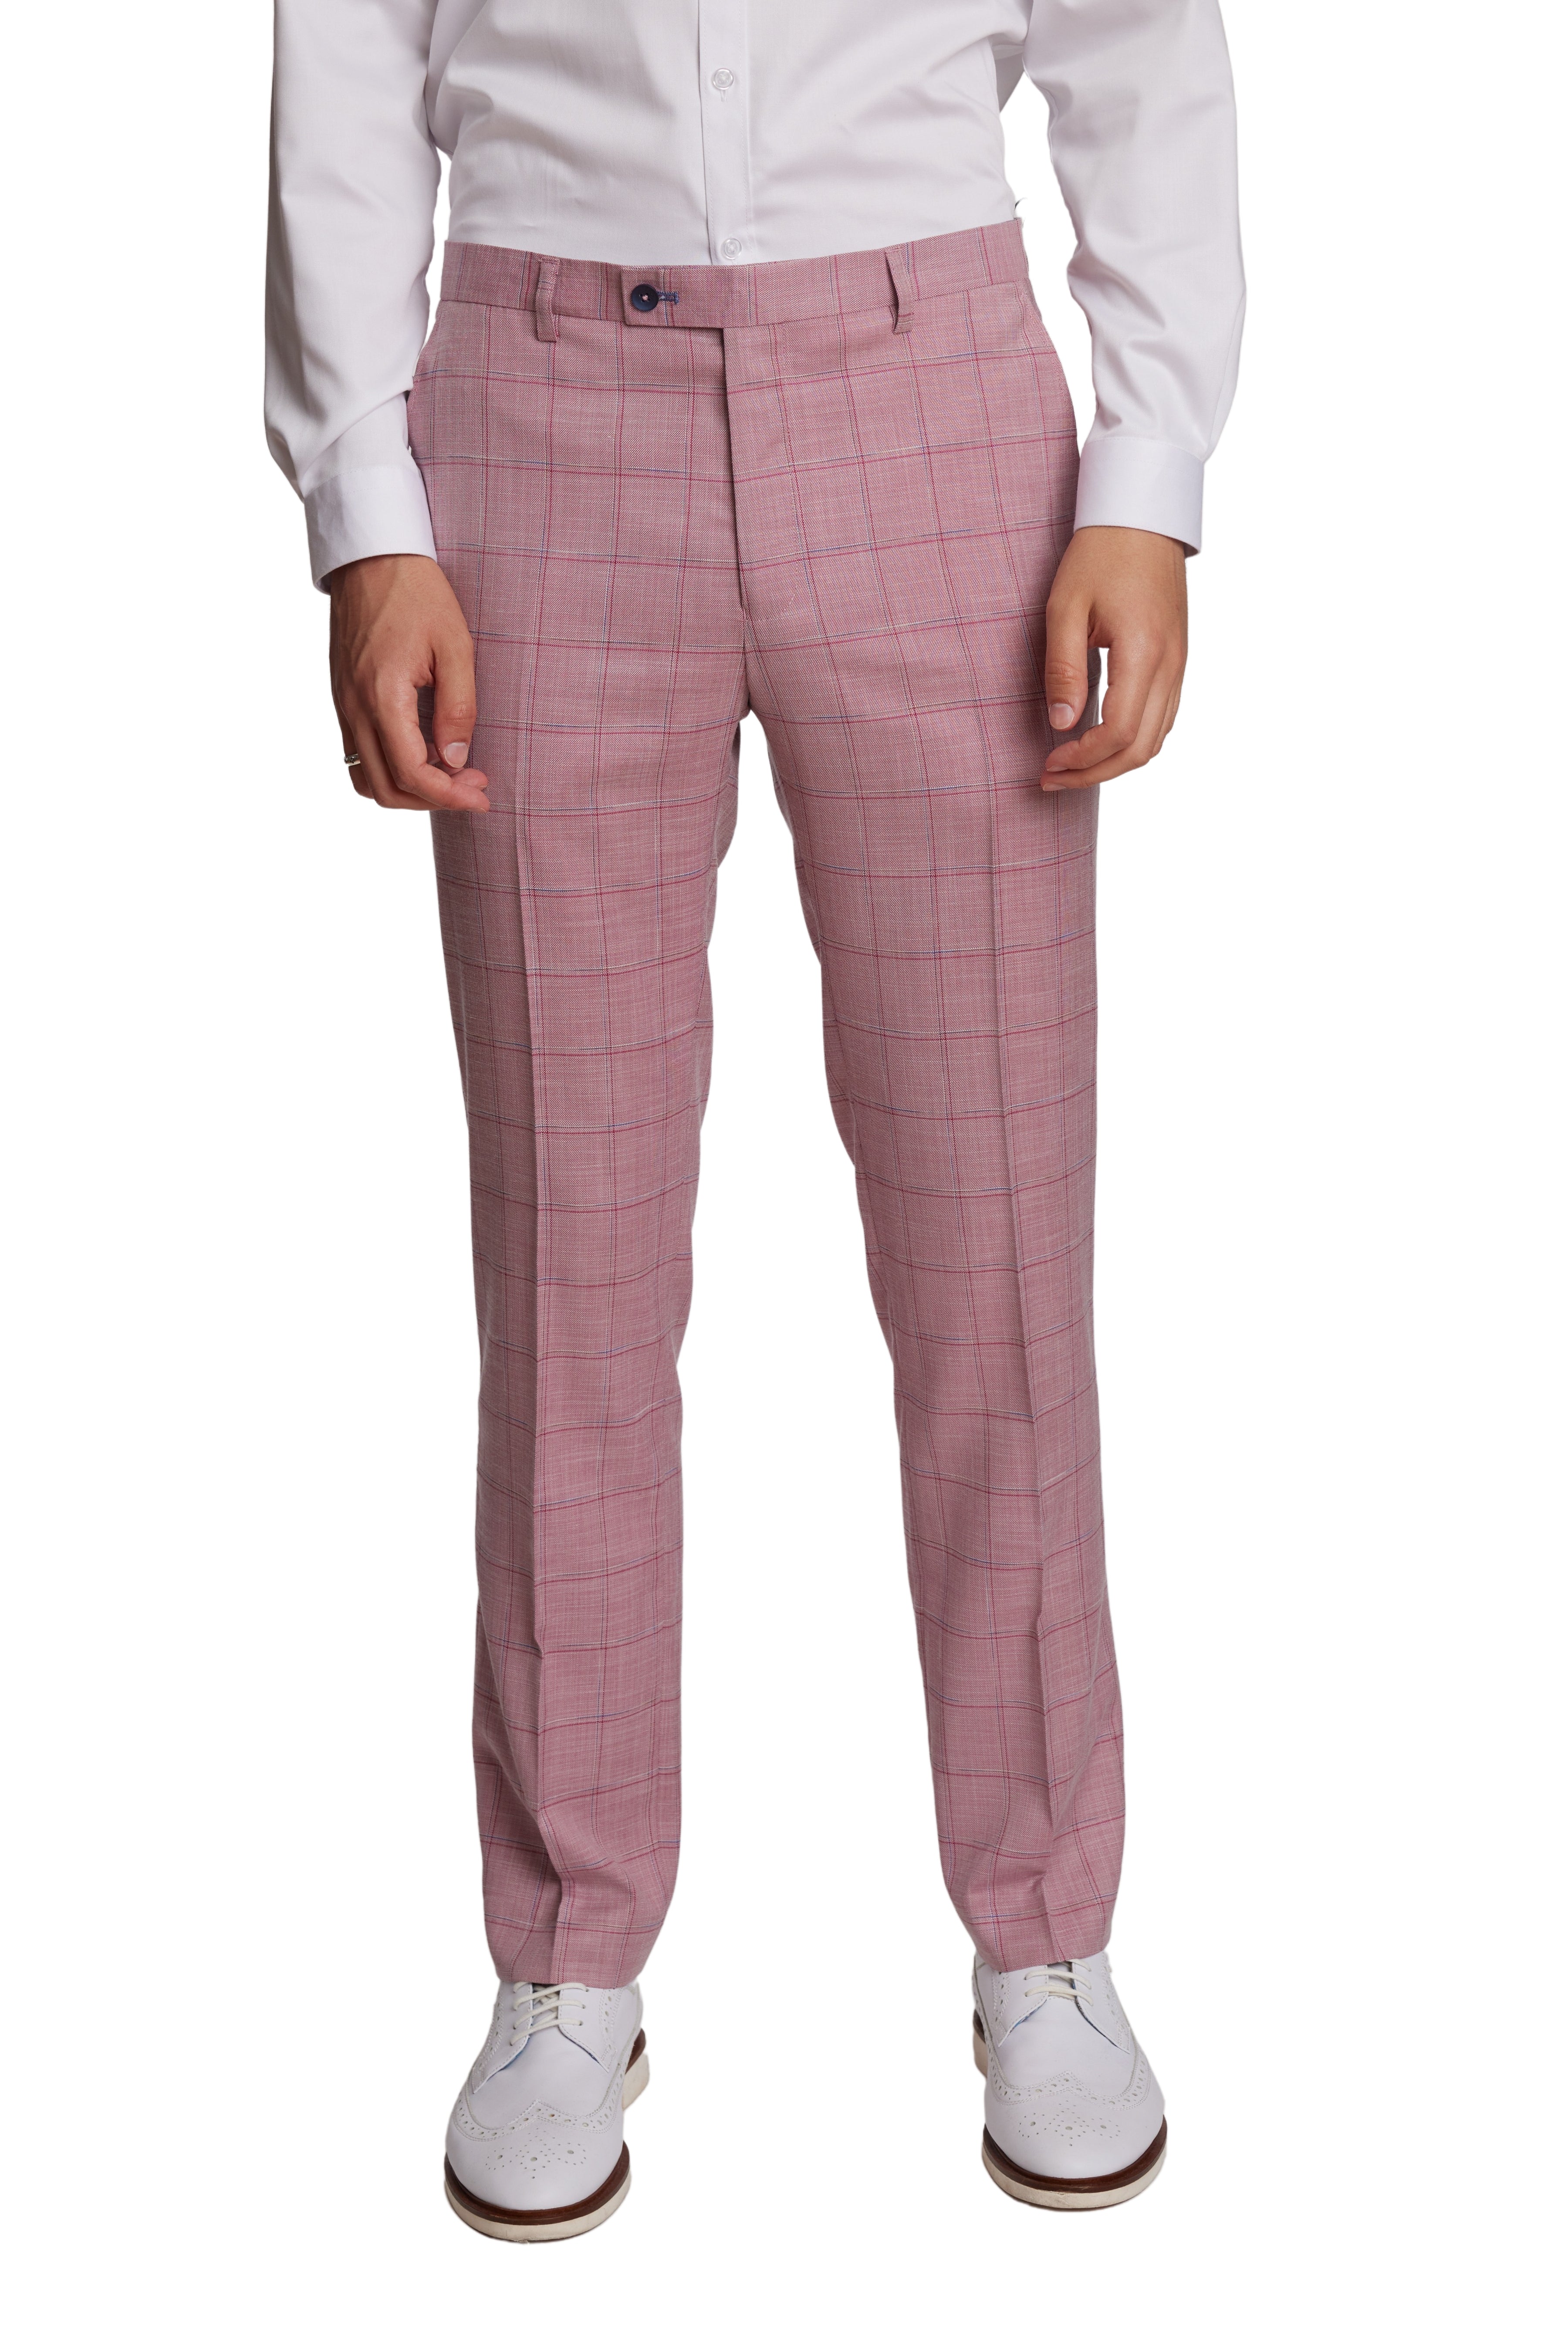 Downing Pants - slim - Pink Double Check